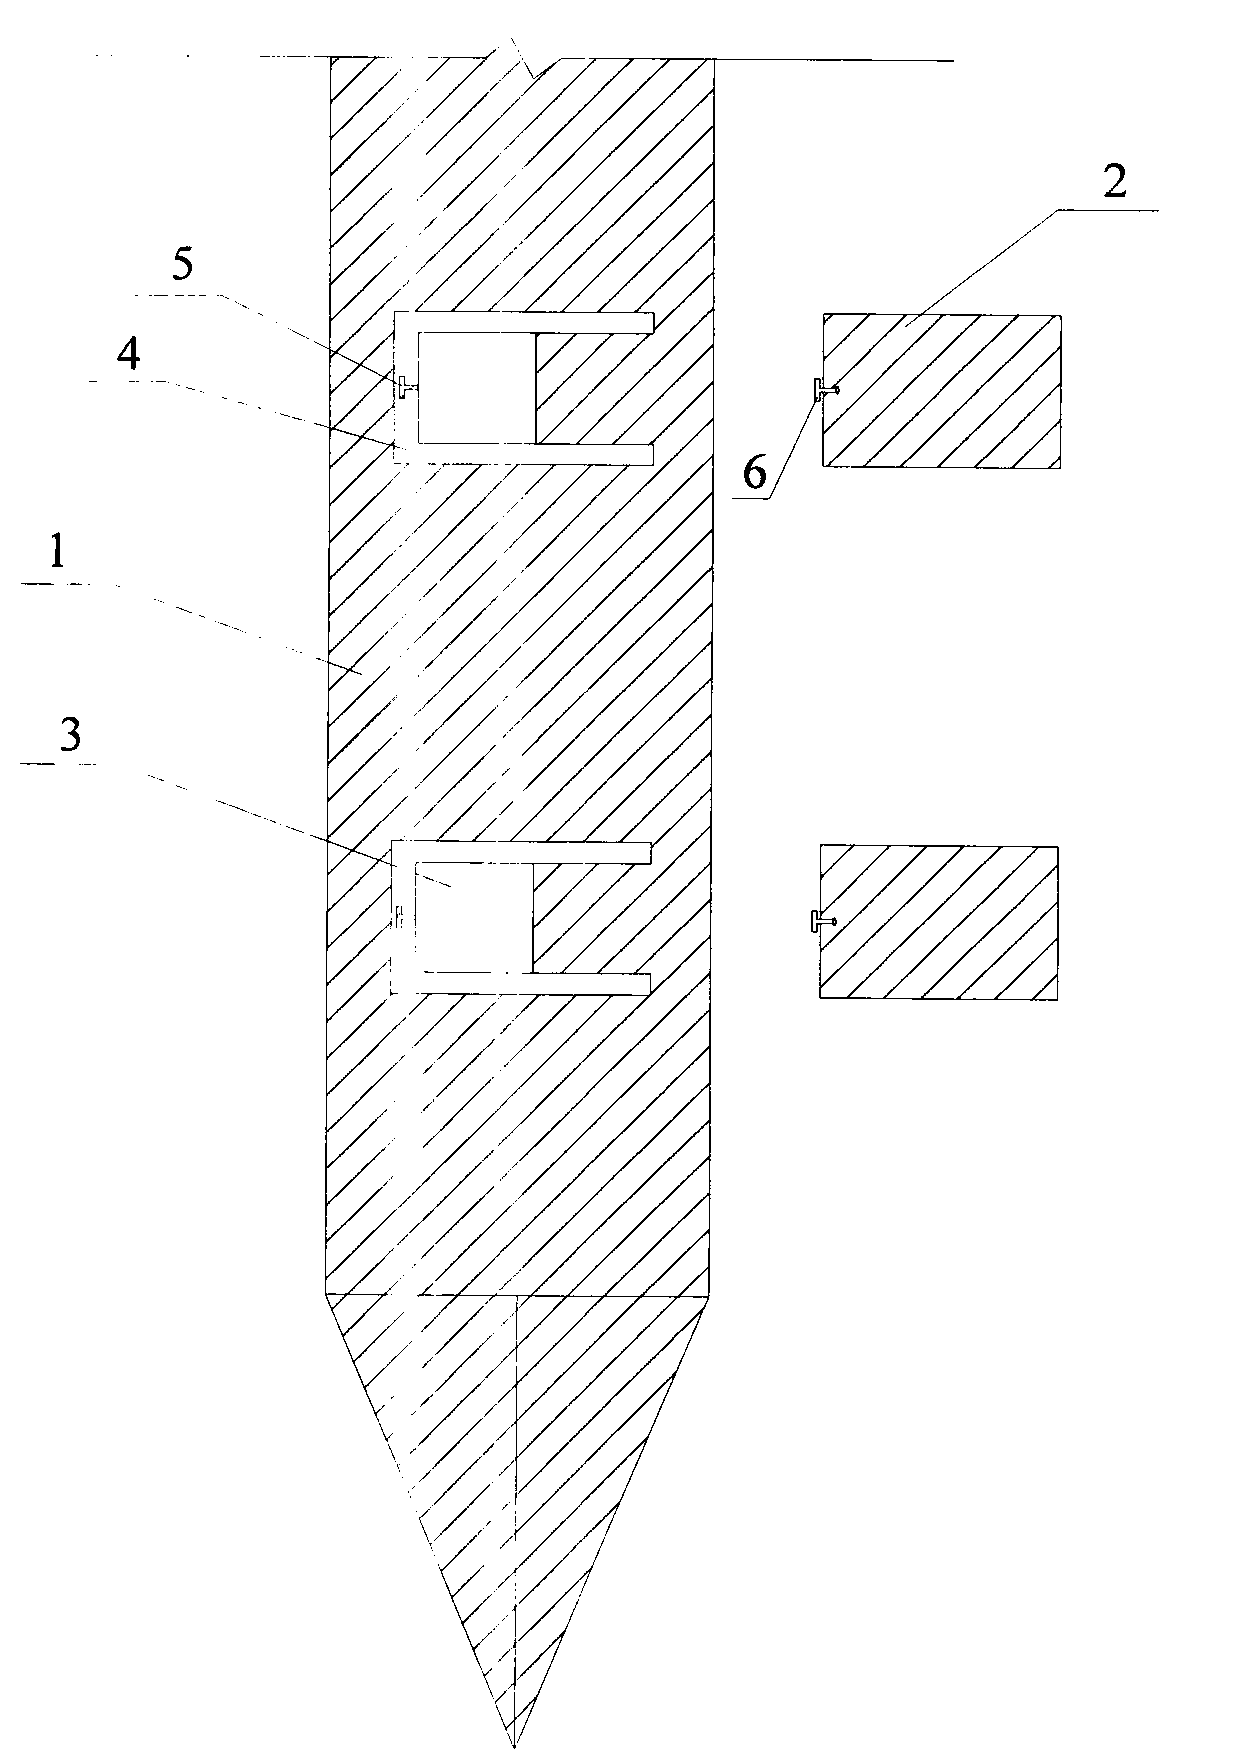 Pile mould with draw-pull type movable feed ports and construction method